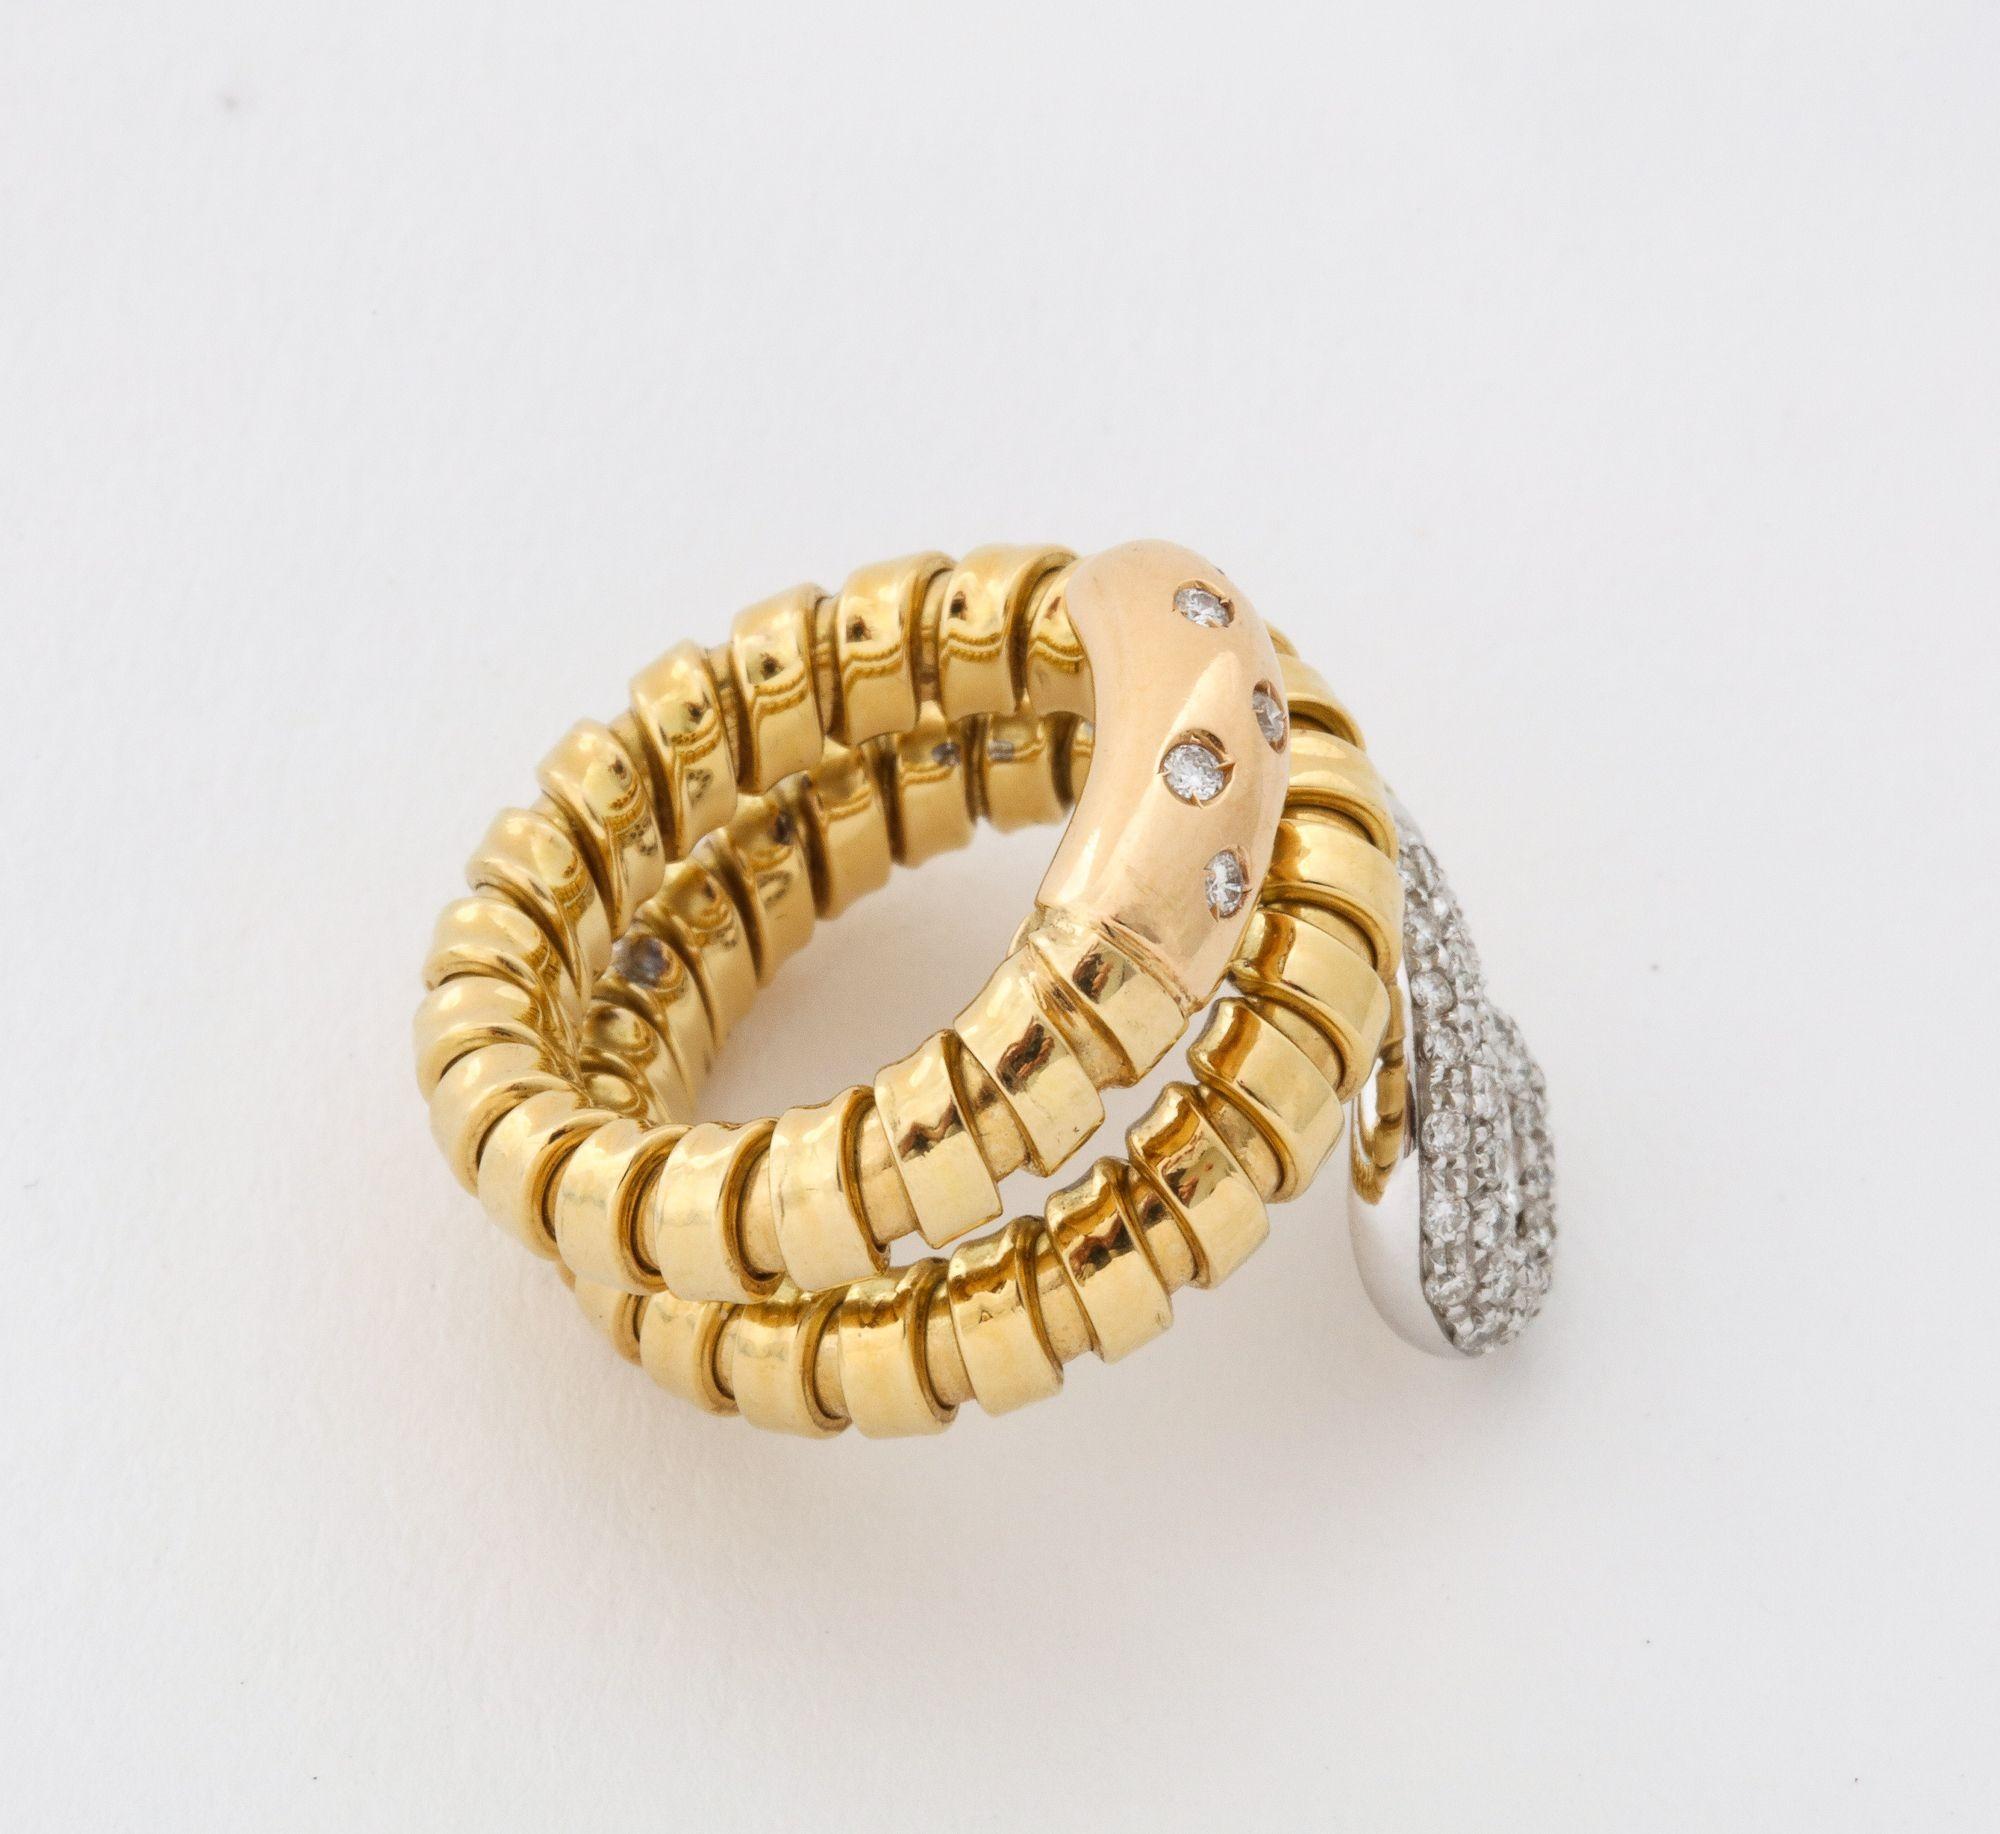  Gold Snake  Tubogas Ring With Diamond Head And Tail 18K For Sale 1